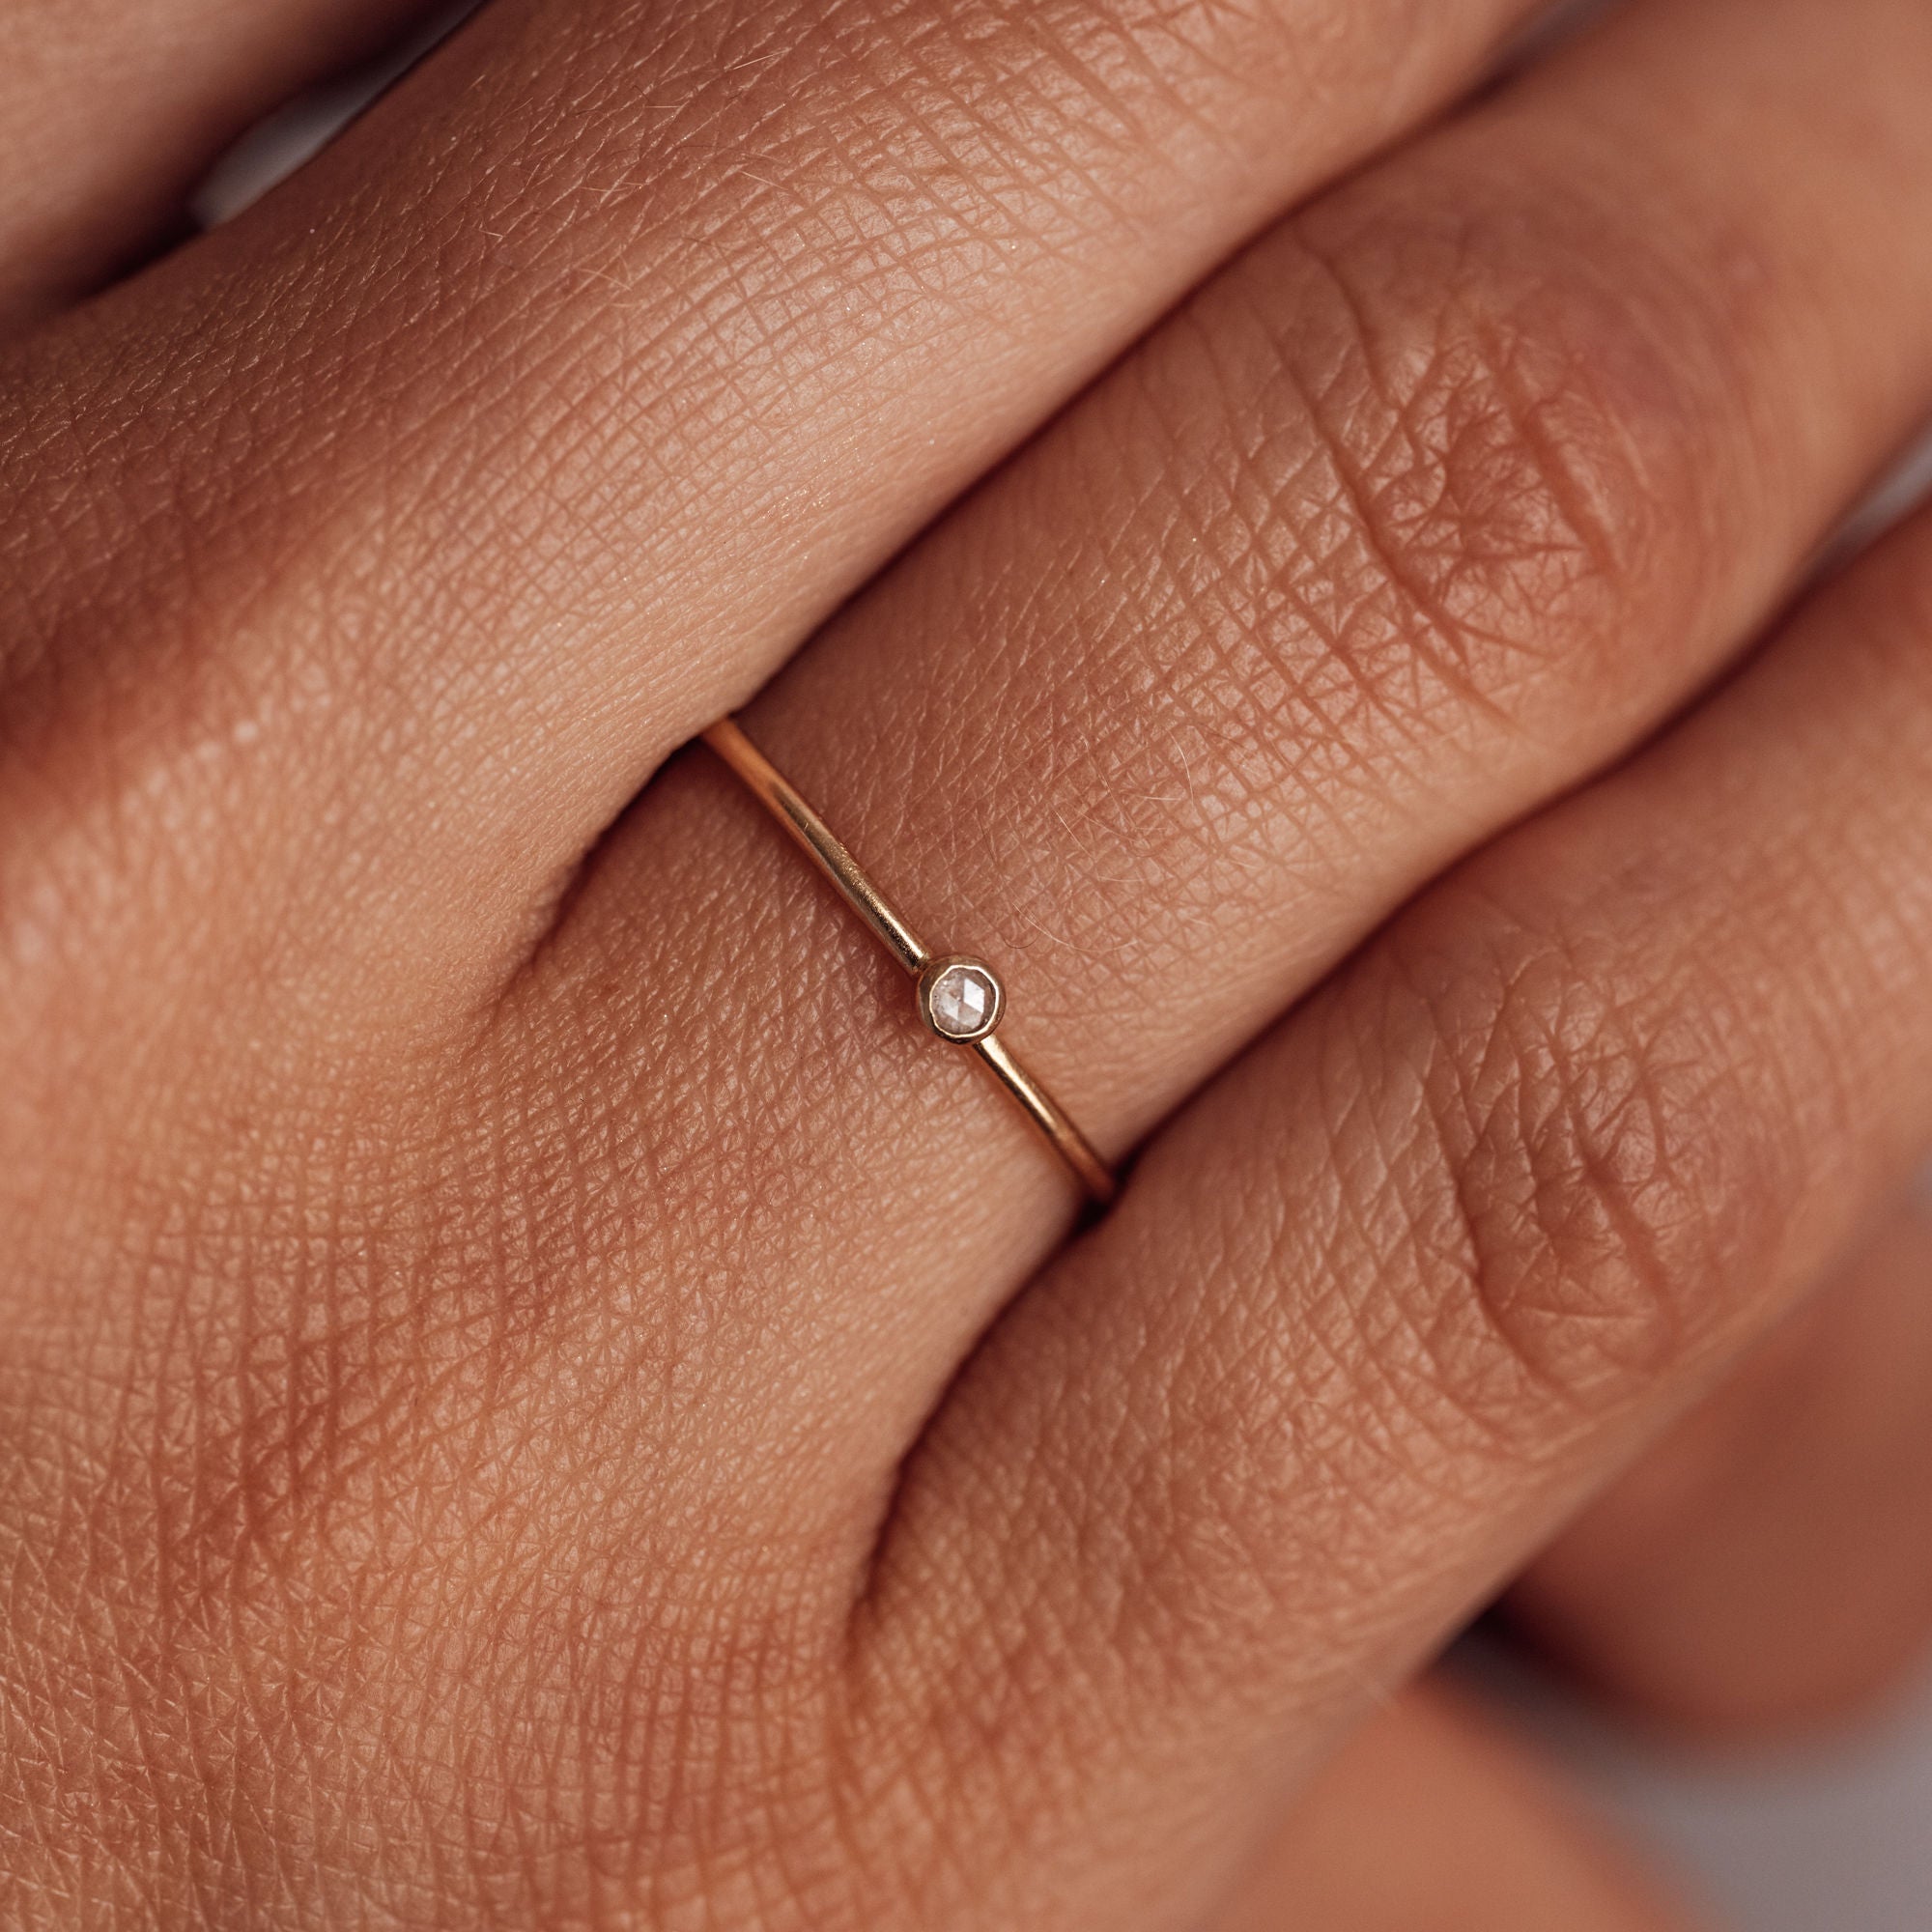 Petite 'Moonflower' Gold Filled Stacking Ring